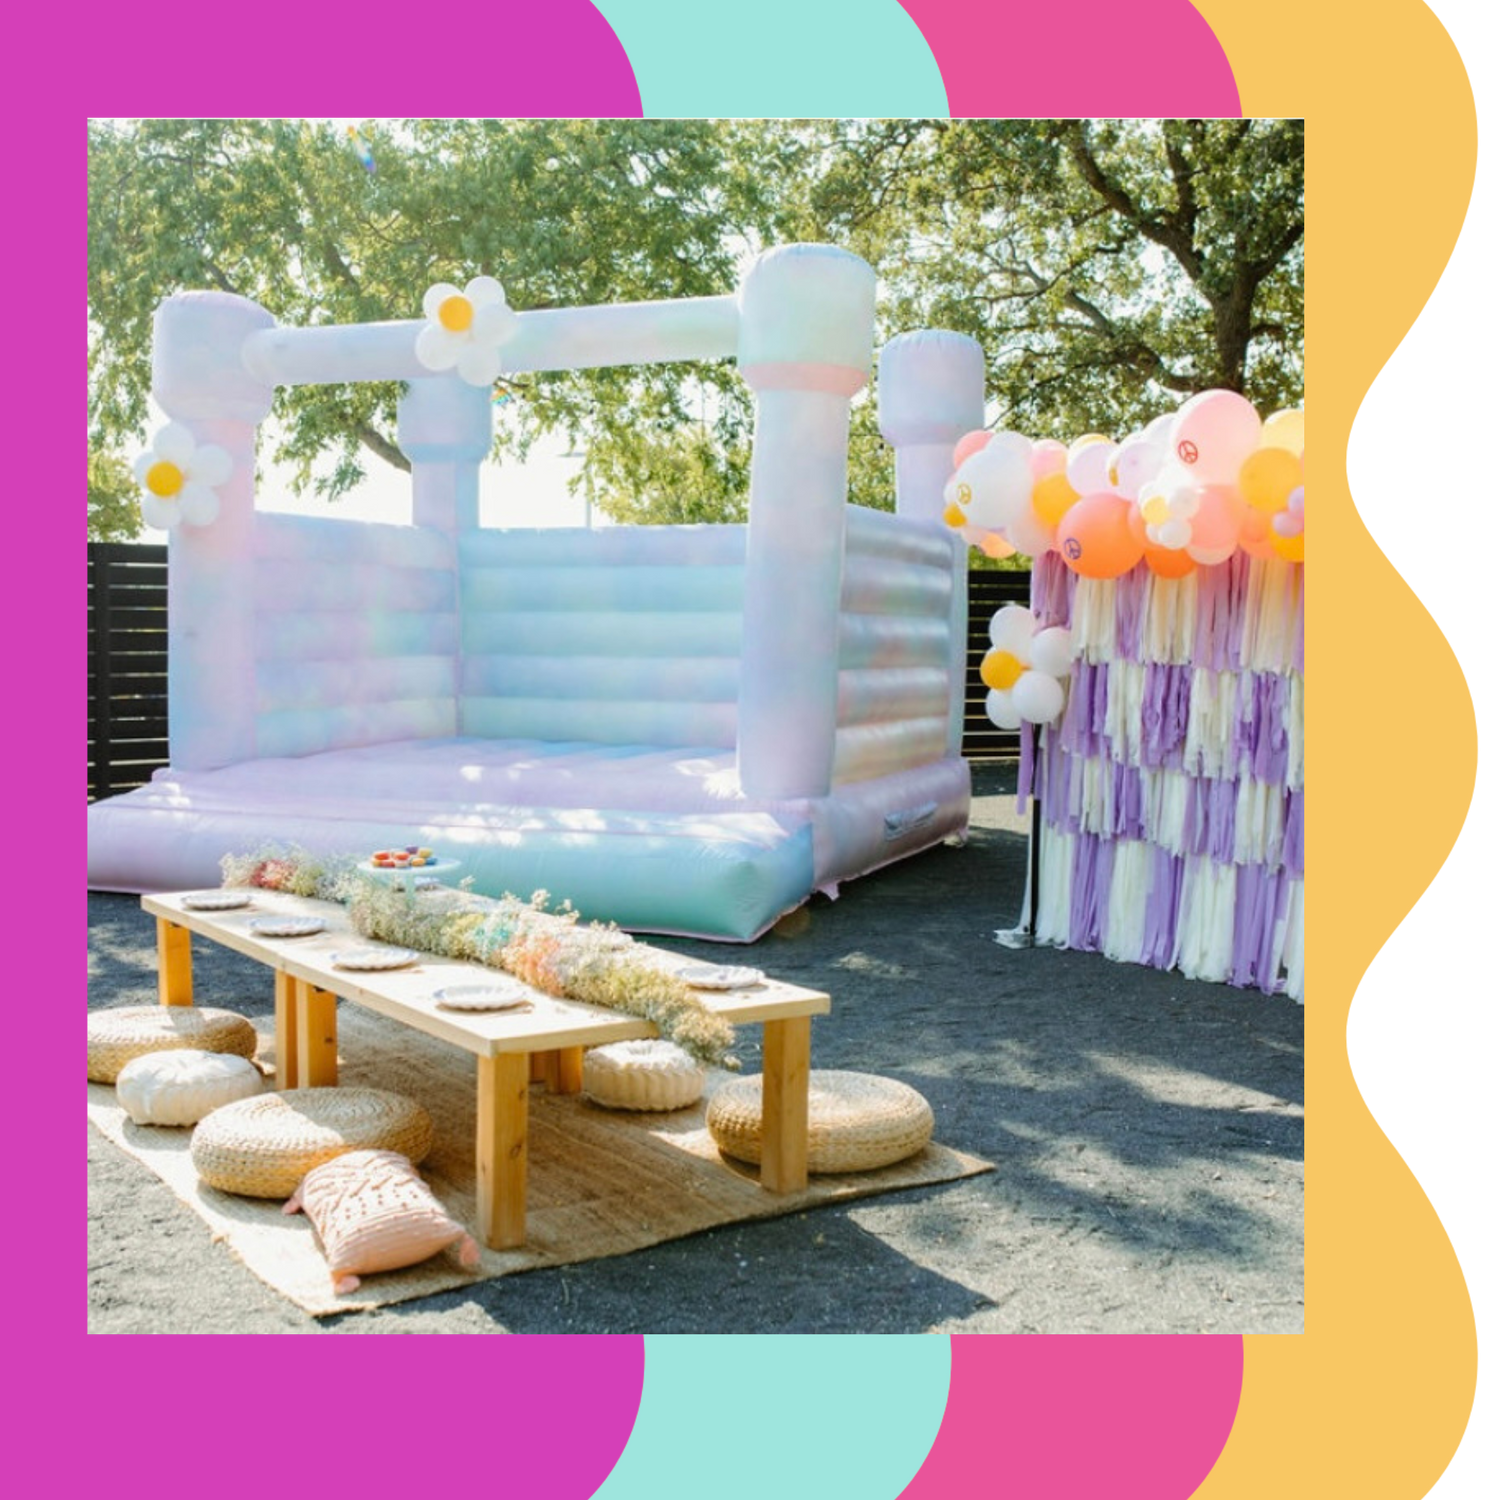 DFW Confetti Bounce # 1 best monochromatic modern bounce house company. Specializing in uniquely designed inflatables and party furniture.